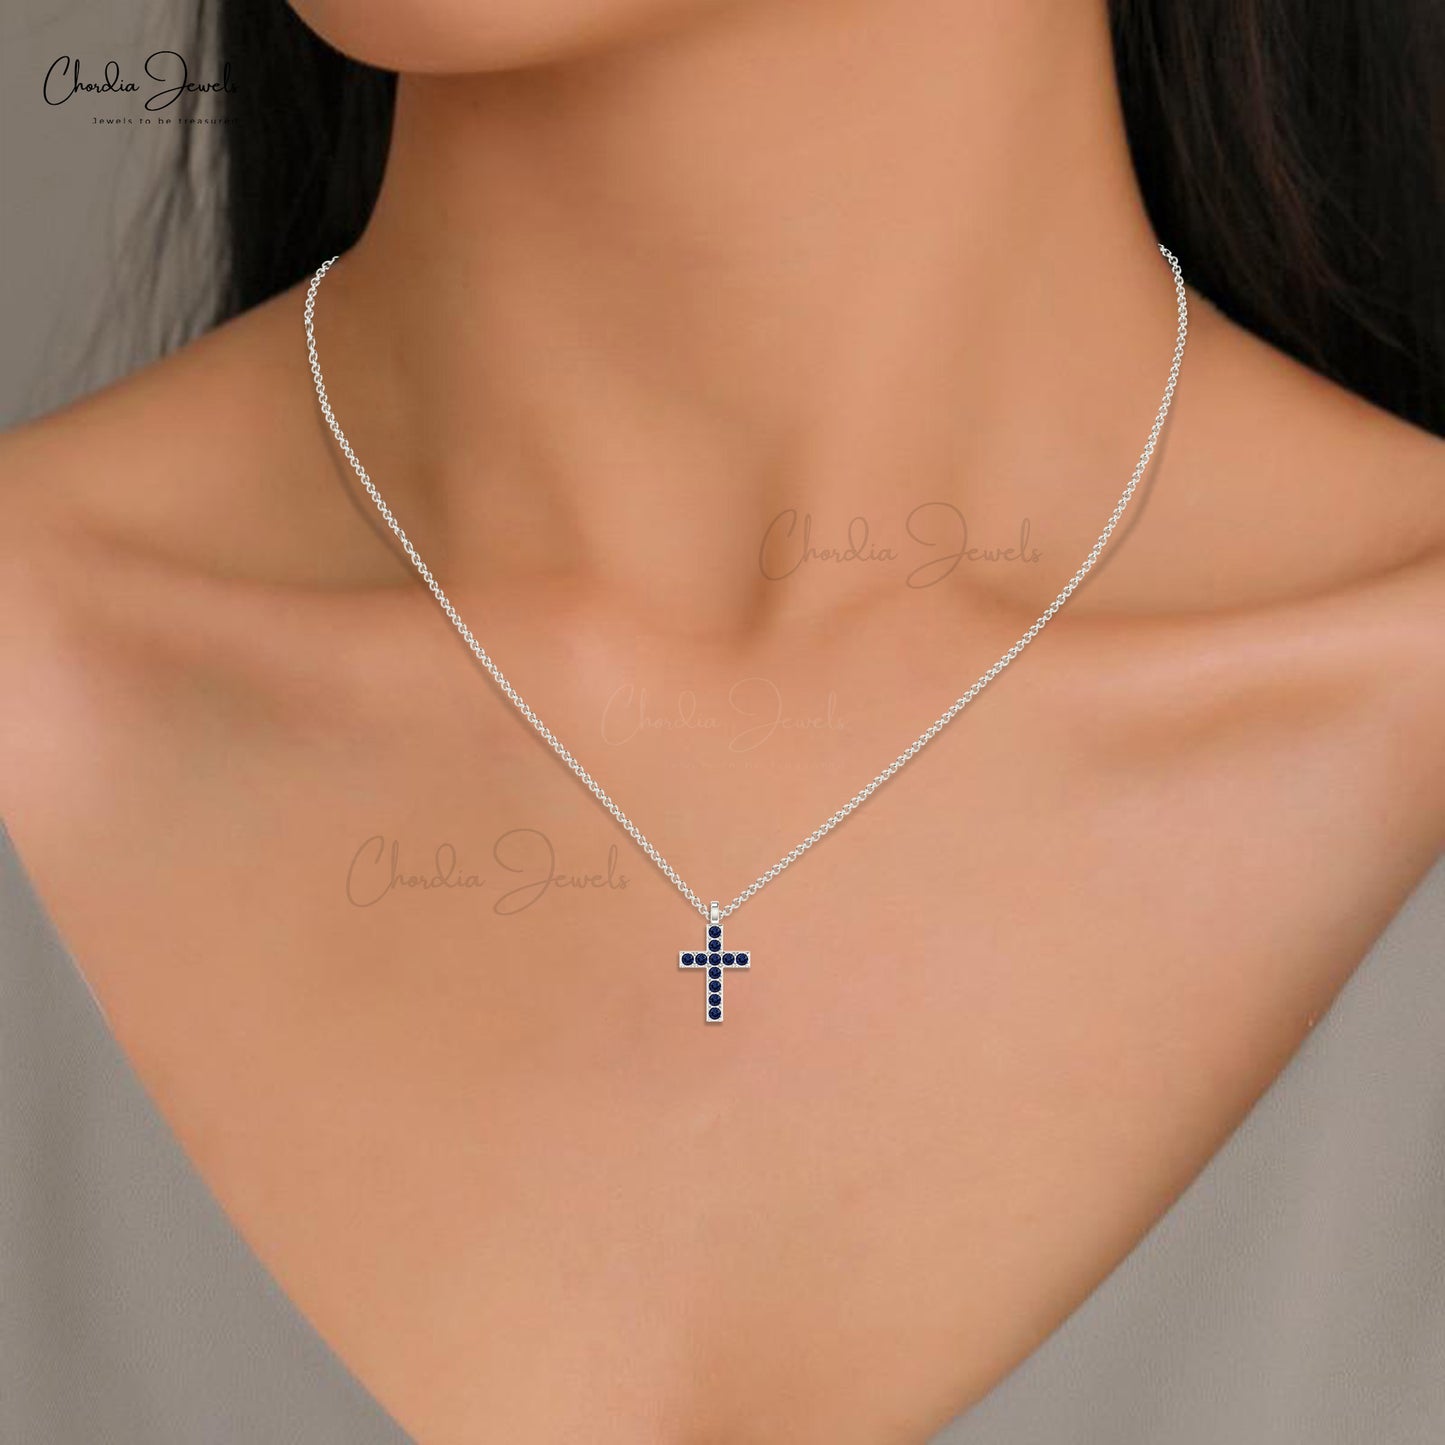 Fashion Simple Style Religious Locket Natural Blue Sapphire Gemstone Cross Pendant Necklace 14k Solid Gold Jewelry For Anniversary Gift